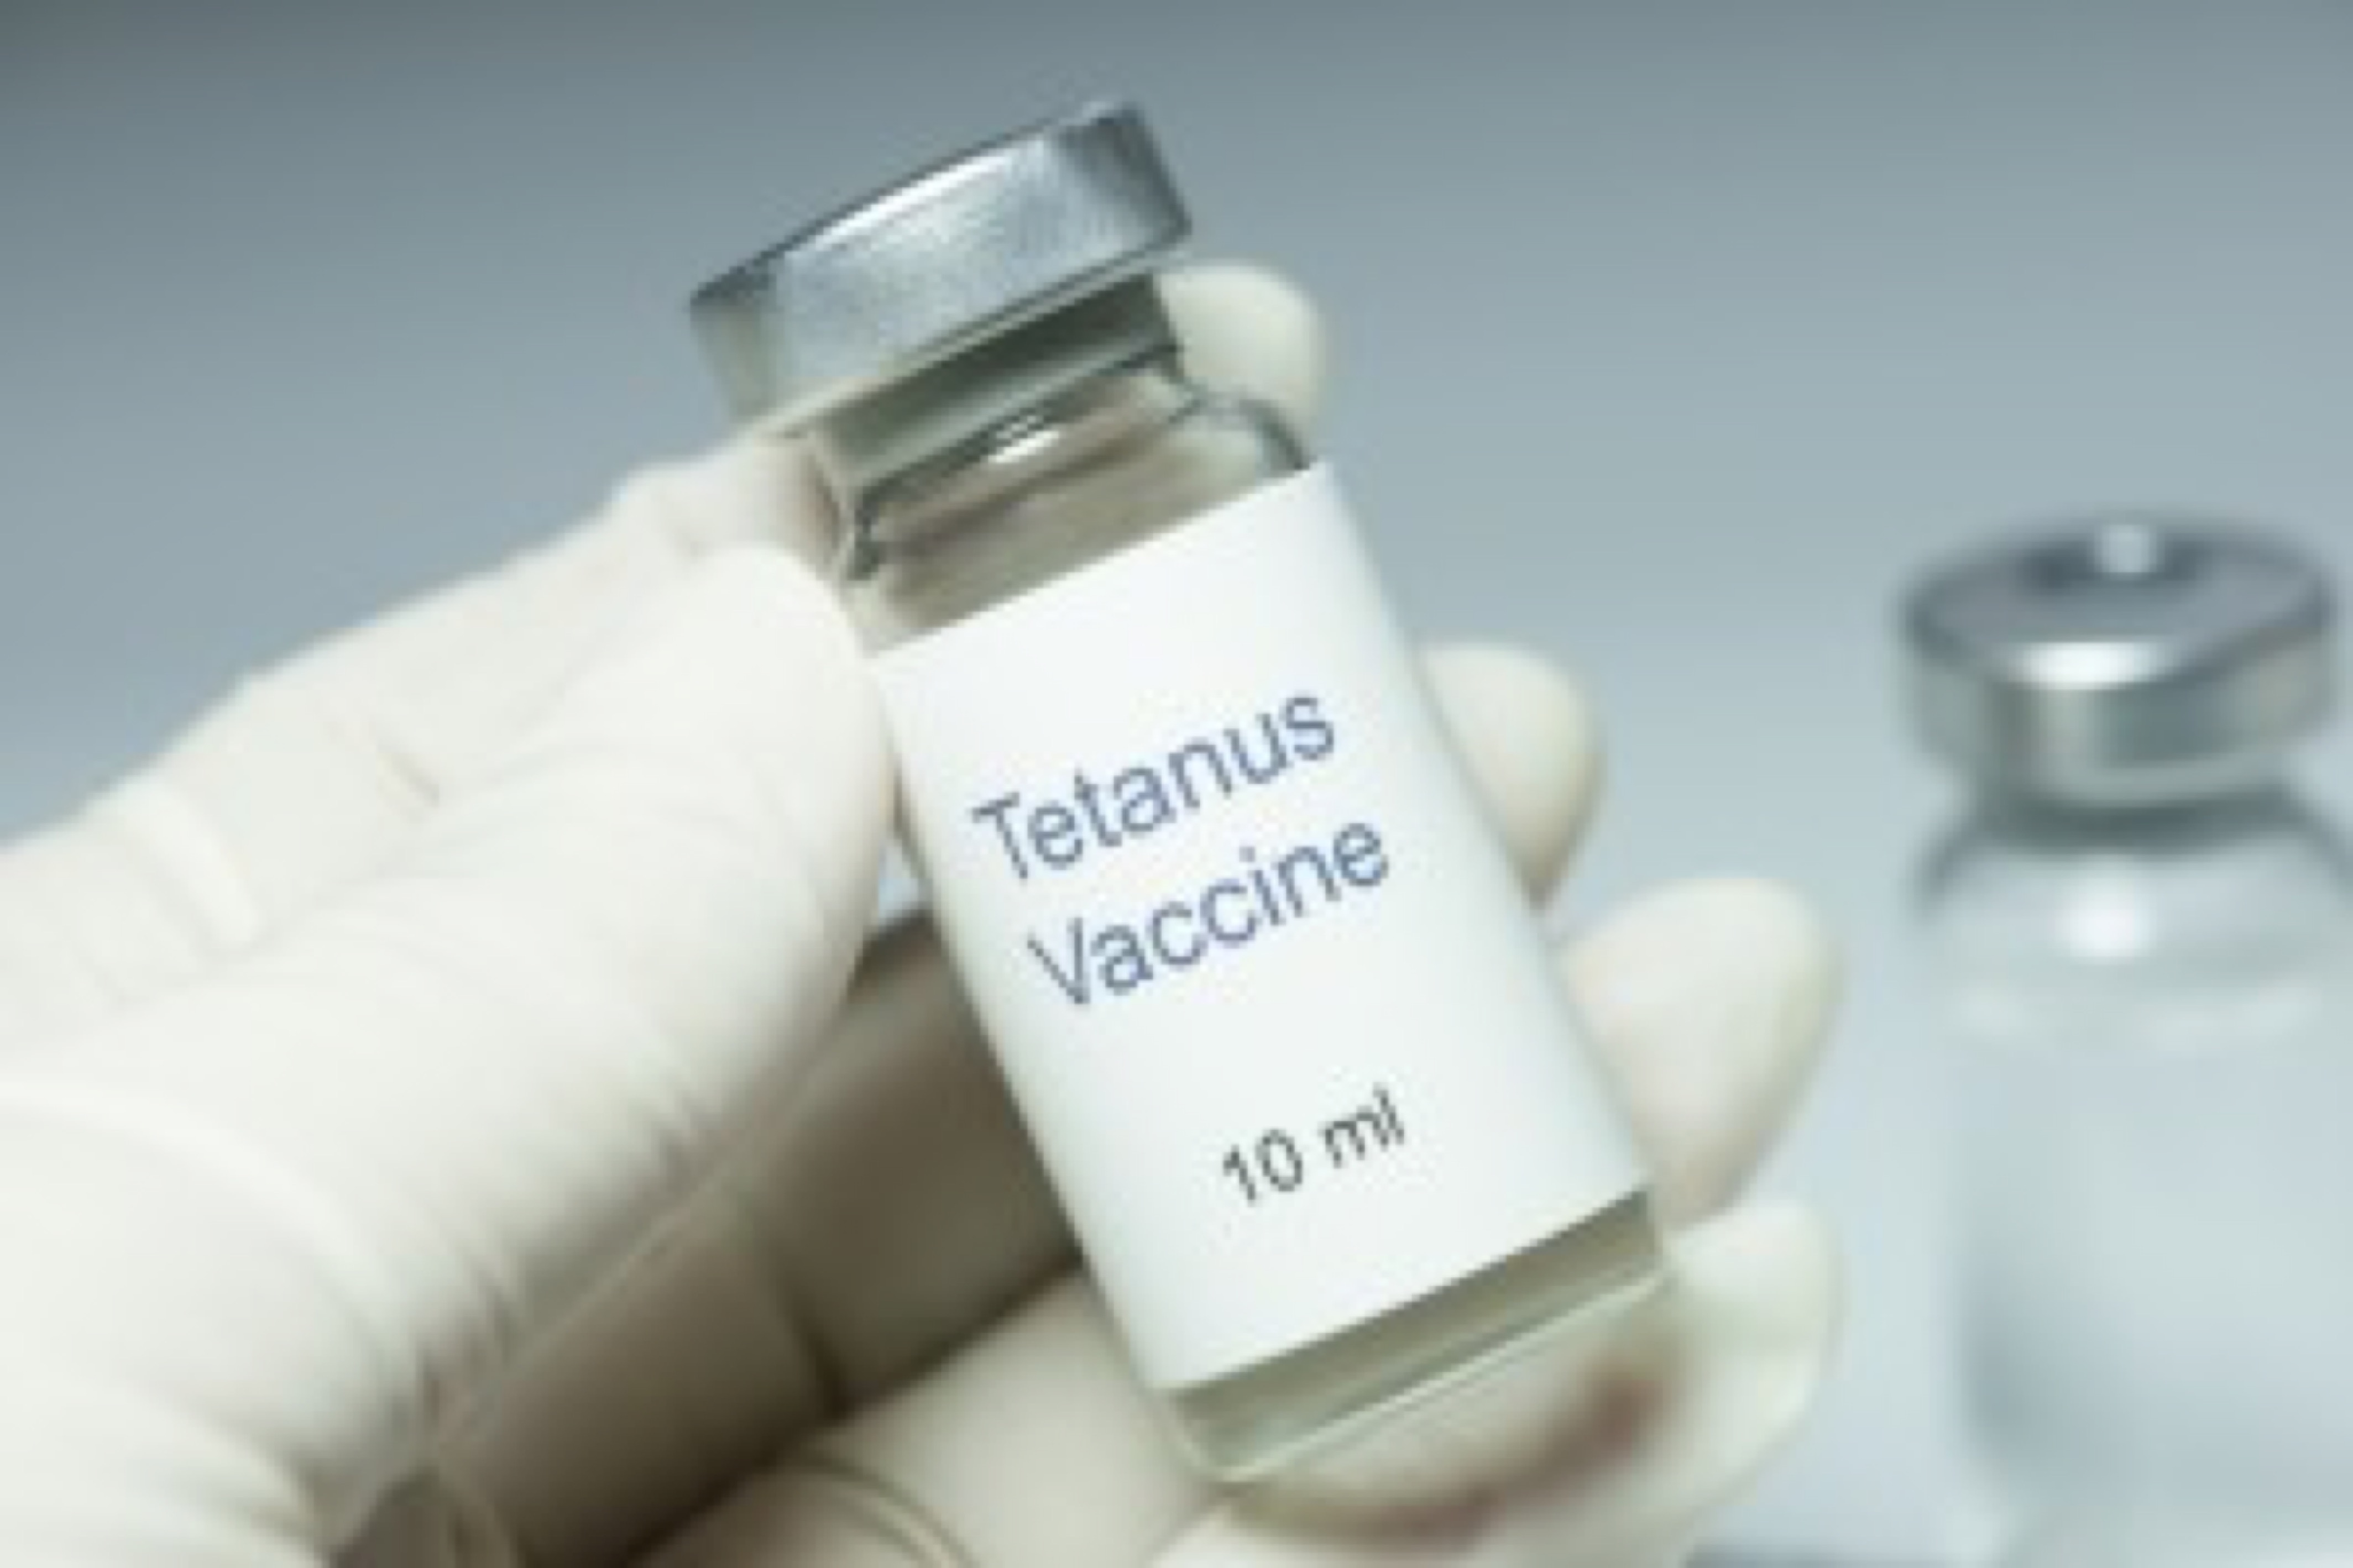 Tetanus vaccine in glass vial with gloved hand.  All labels, paperwork, etc. are fictitious, and numbers/letters/serials are random.